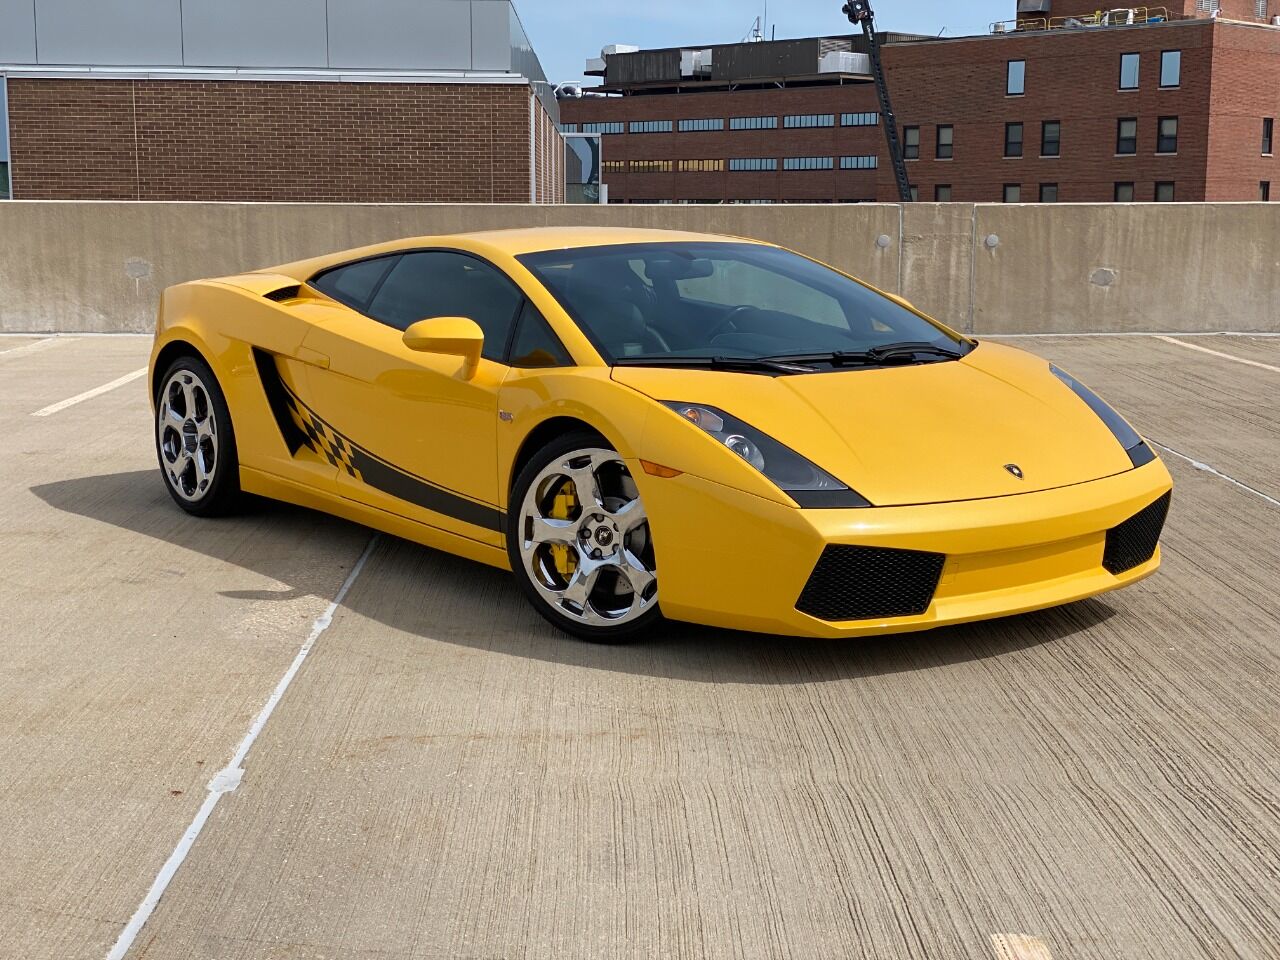 What is the cheapest lamborghini in the world